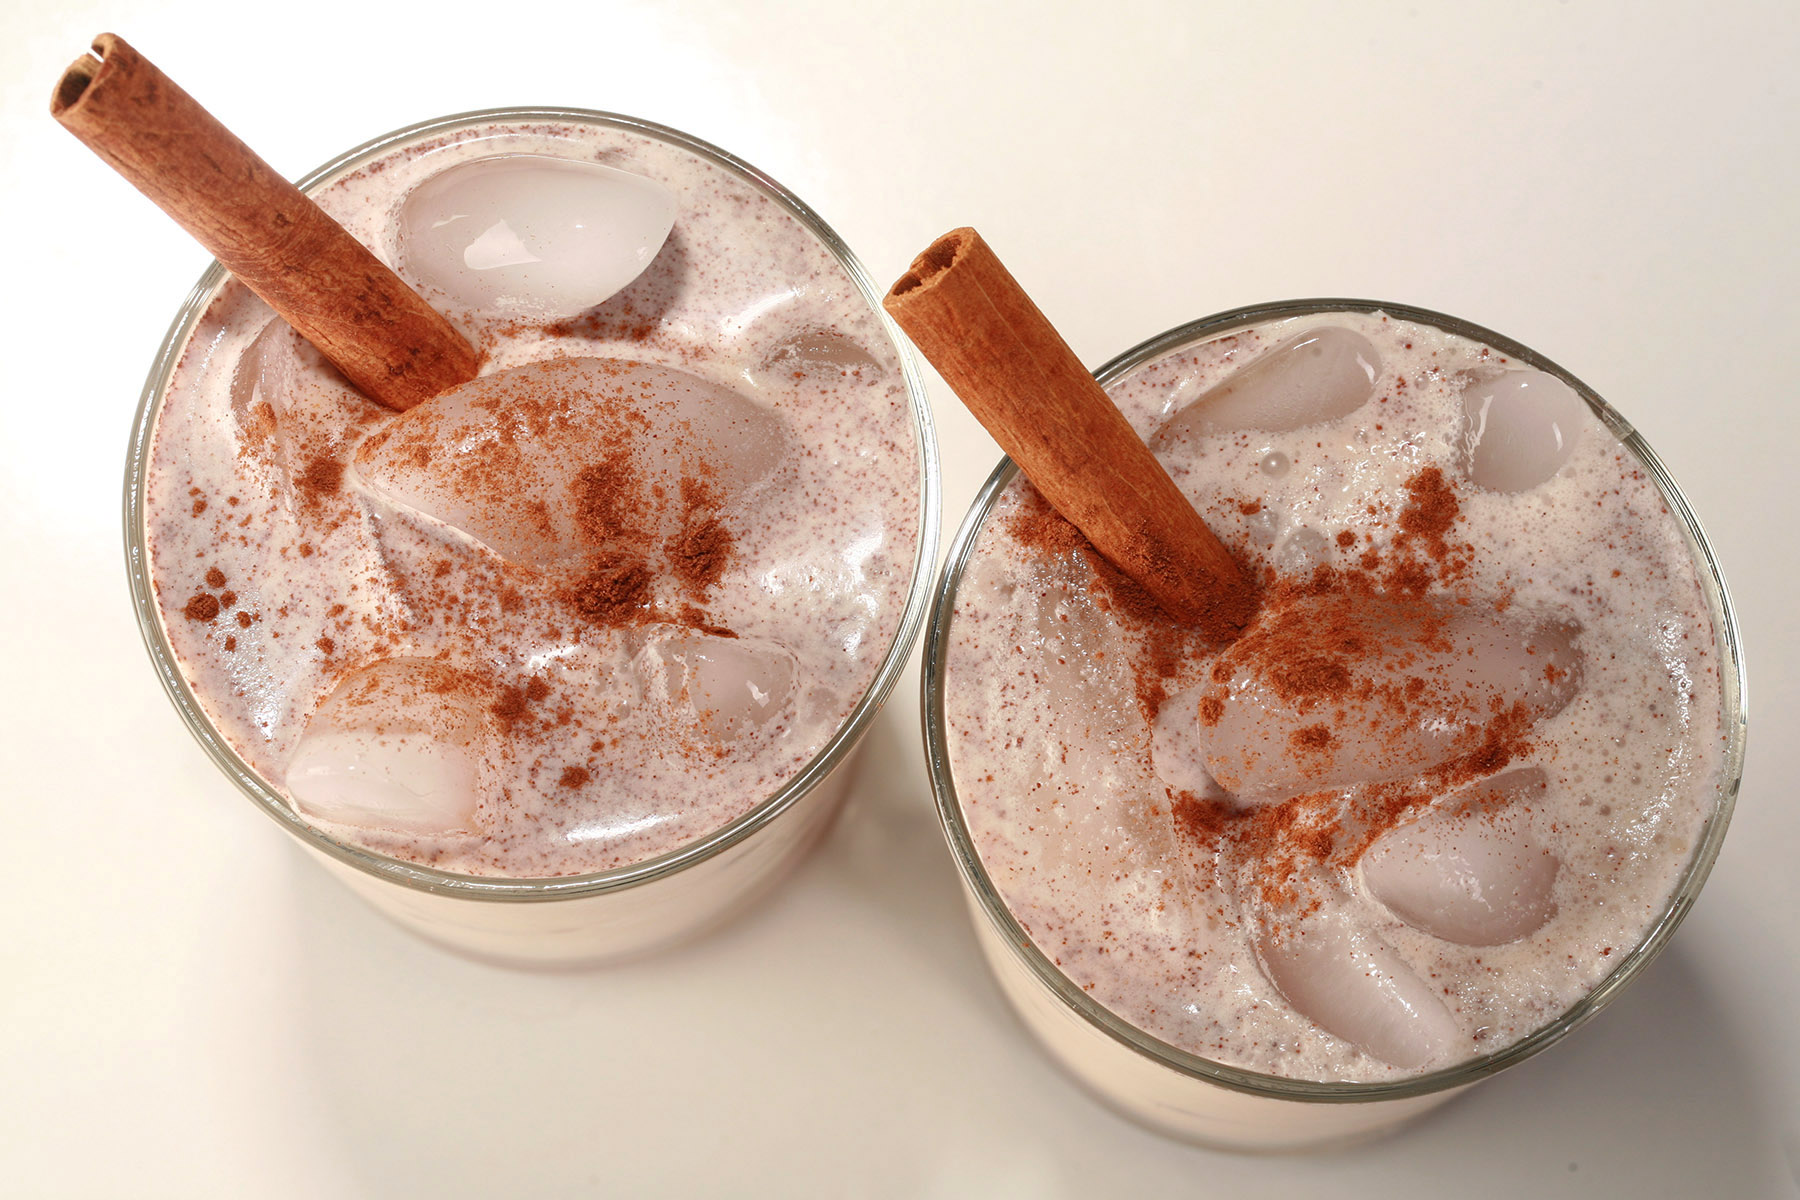 2 glasses of low-carb rumchata, garnished with a sinnamon stick and sprinkle of cinnamon.